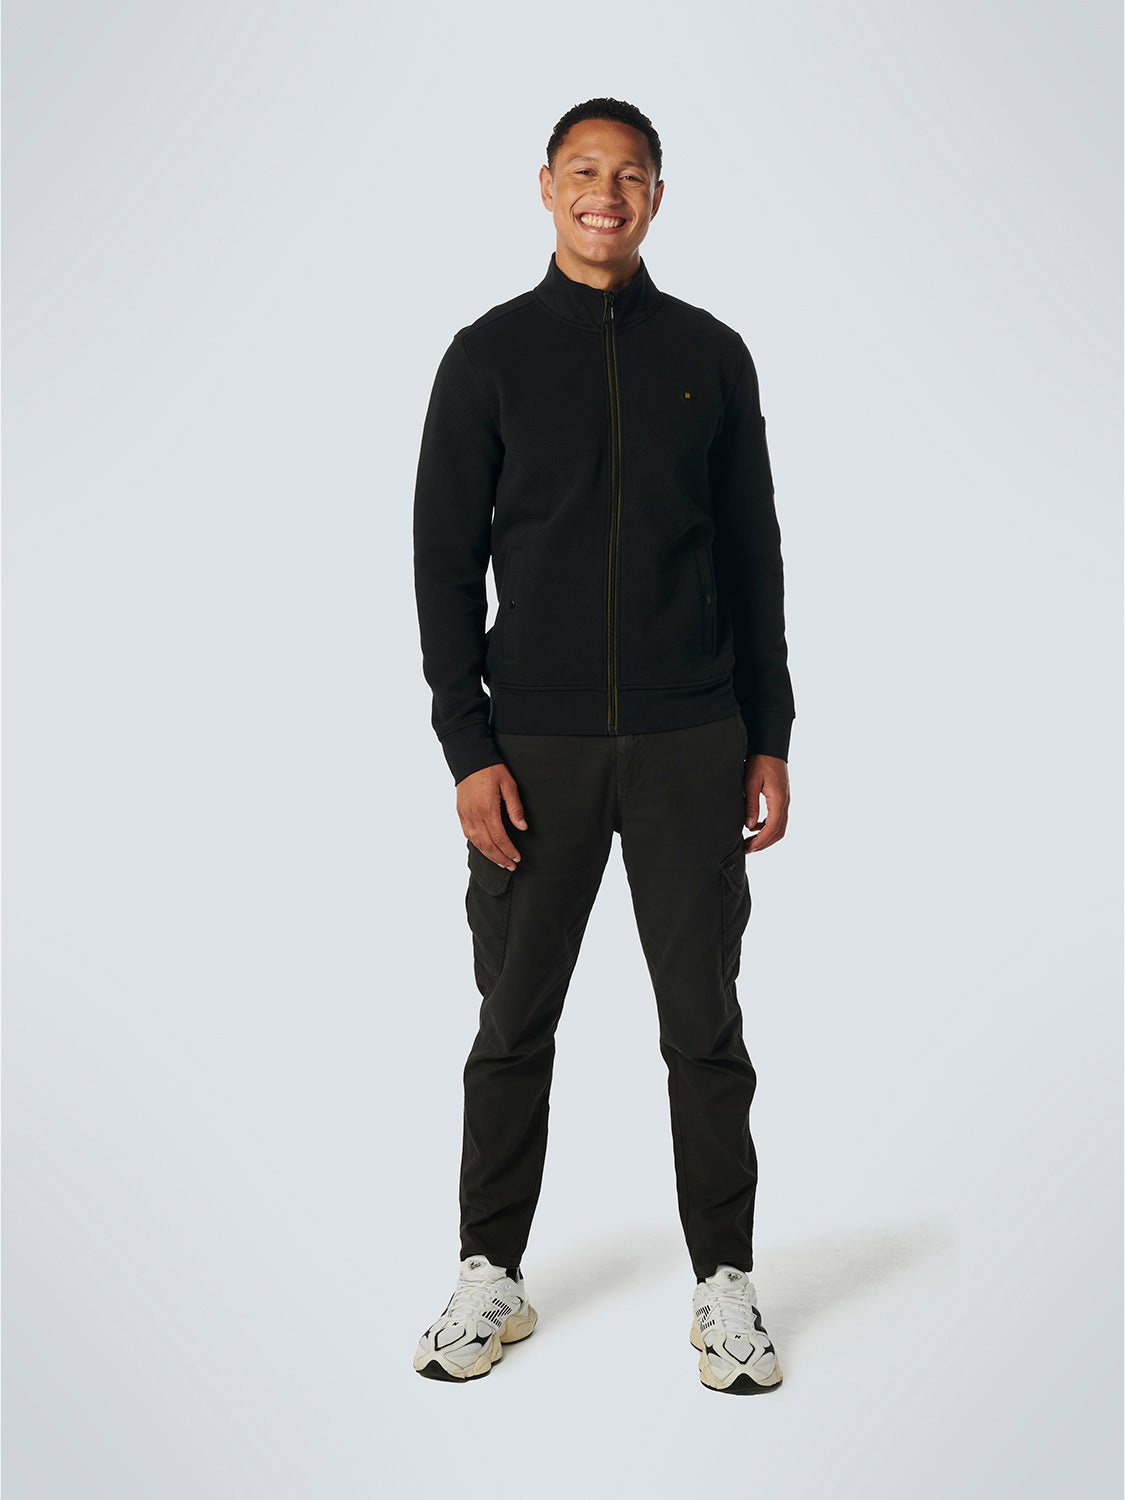 No Excess - Full Zip Jacquard Sweater - Stone or Black